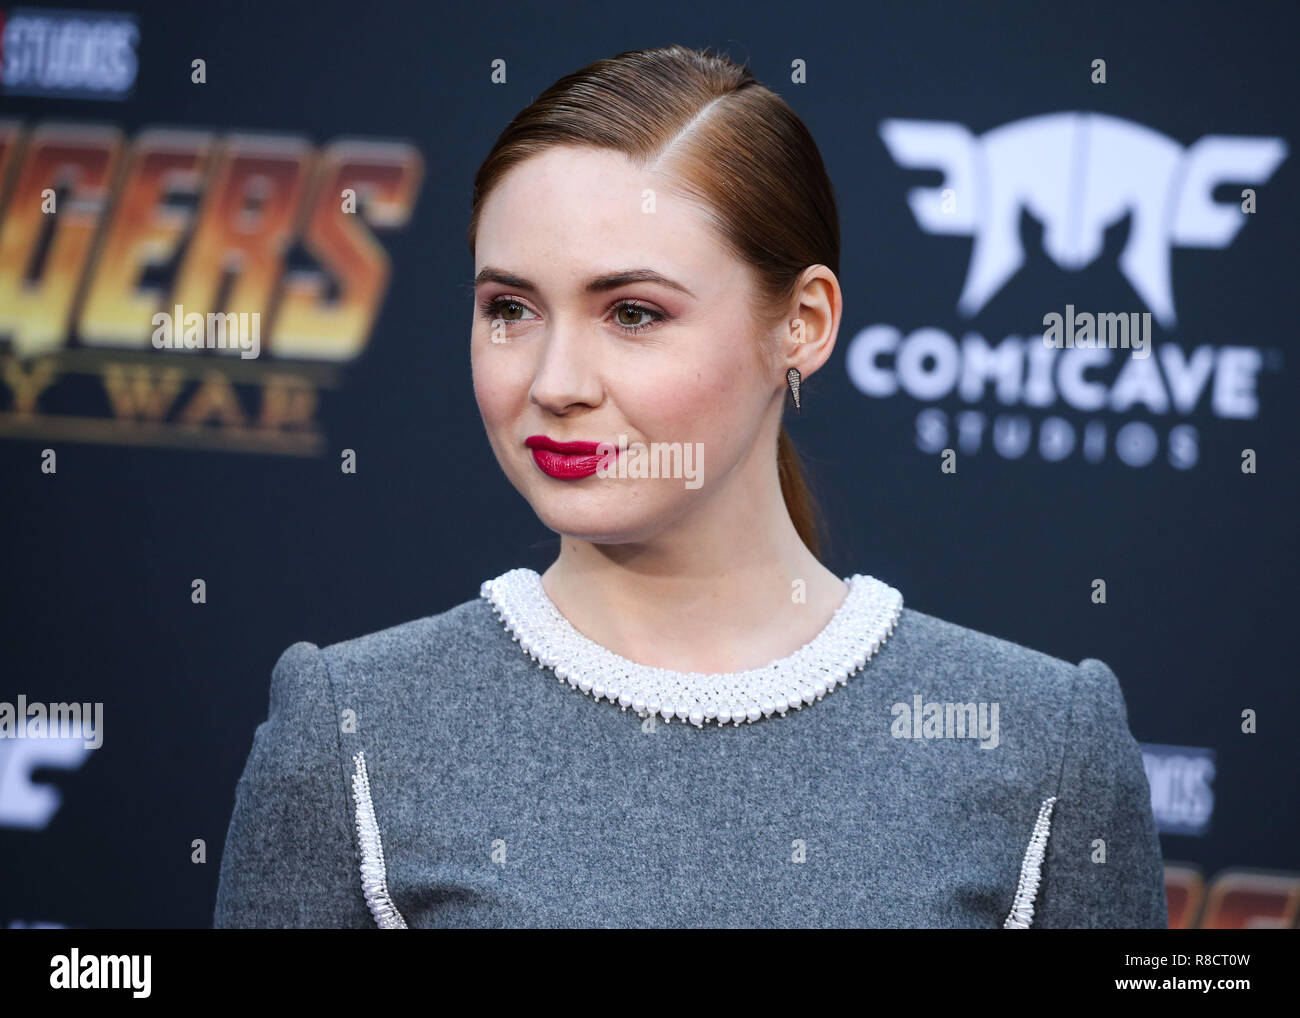 HOLLYWOOD, LOS ANGELES, CA, USA - APRIL 23: Karen Gillan at the World Premiere Of Disney And Marvel's 'Avengers: Infinity War' held at the El Capitan Theatre, Dolby Theatre and TCL Chinese Theatre IMAX on April 23, 2018 in Hollywood, Los Angeles, California, United States. (Photo by Xavier Collin/Image Press Agency) Stock Photo